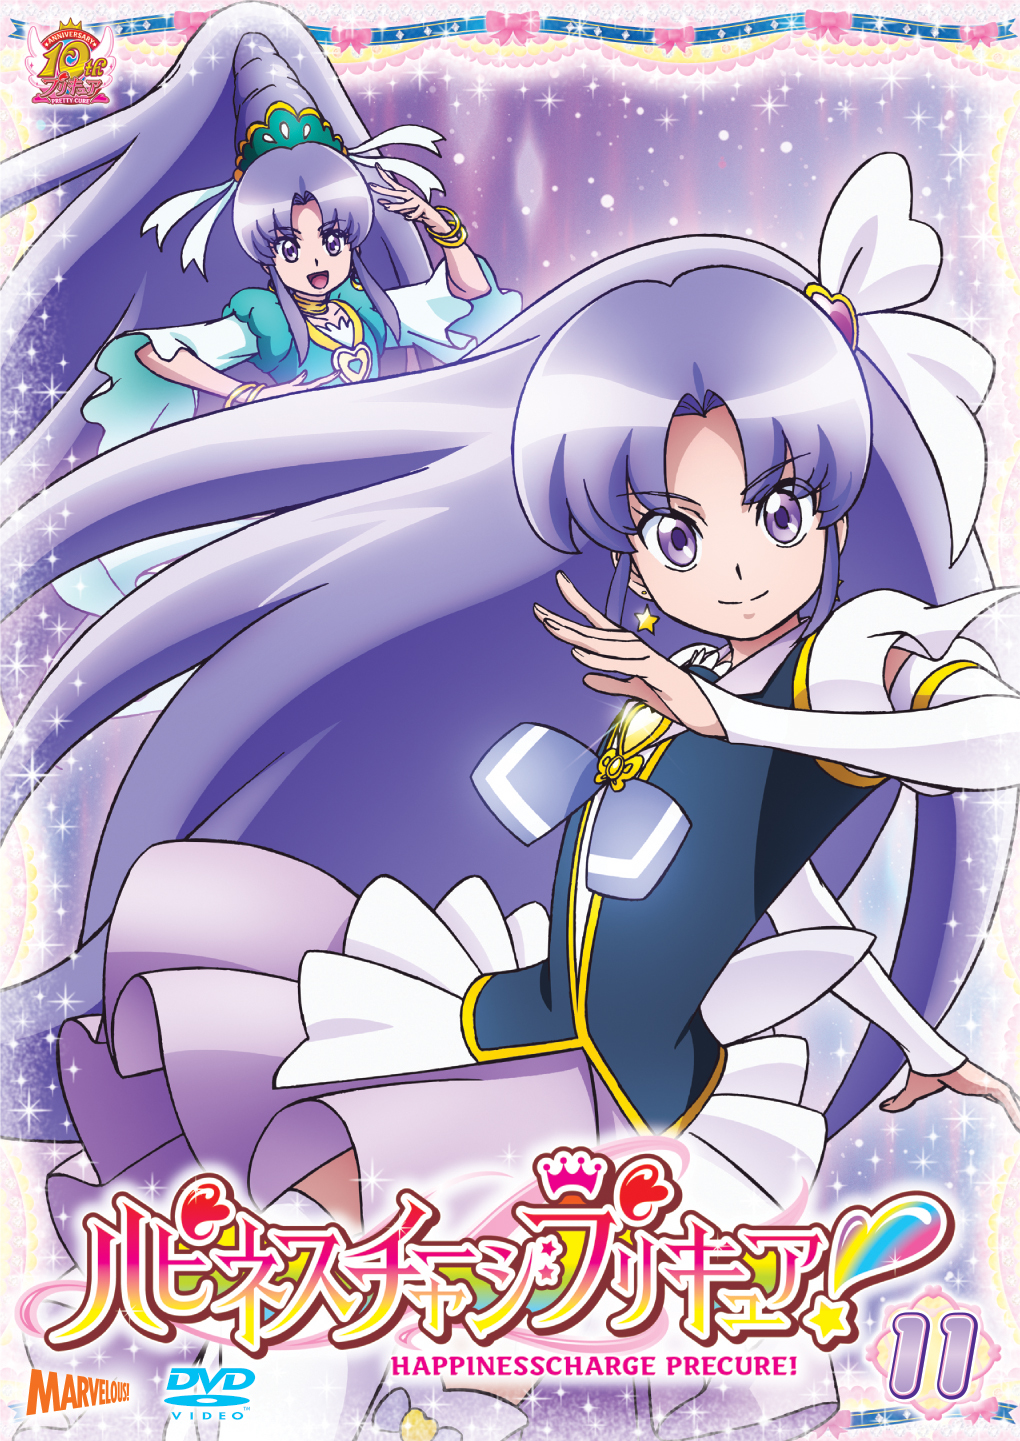 cure_fortune dress happinesscharge_precure! iona_hikawa long_hair mahou_shoujo ponytail purple_eyes violet_hair